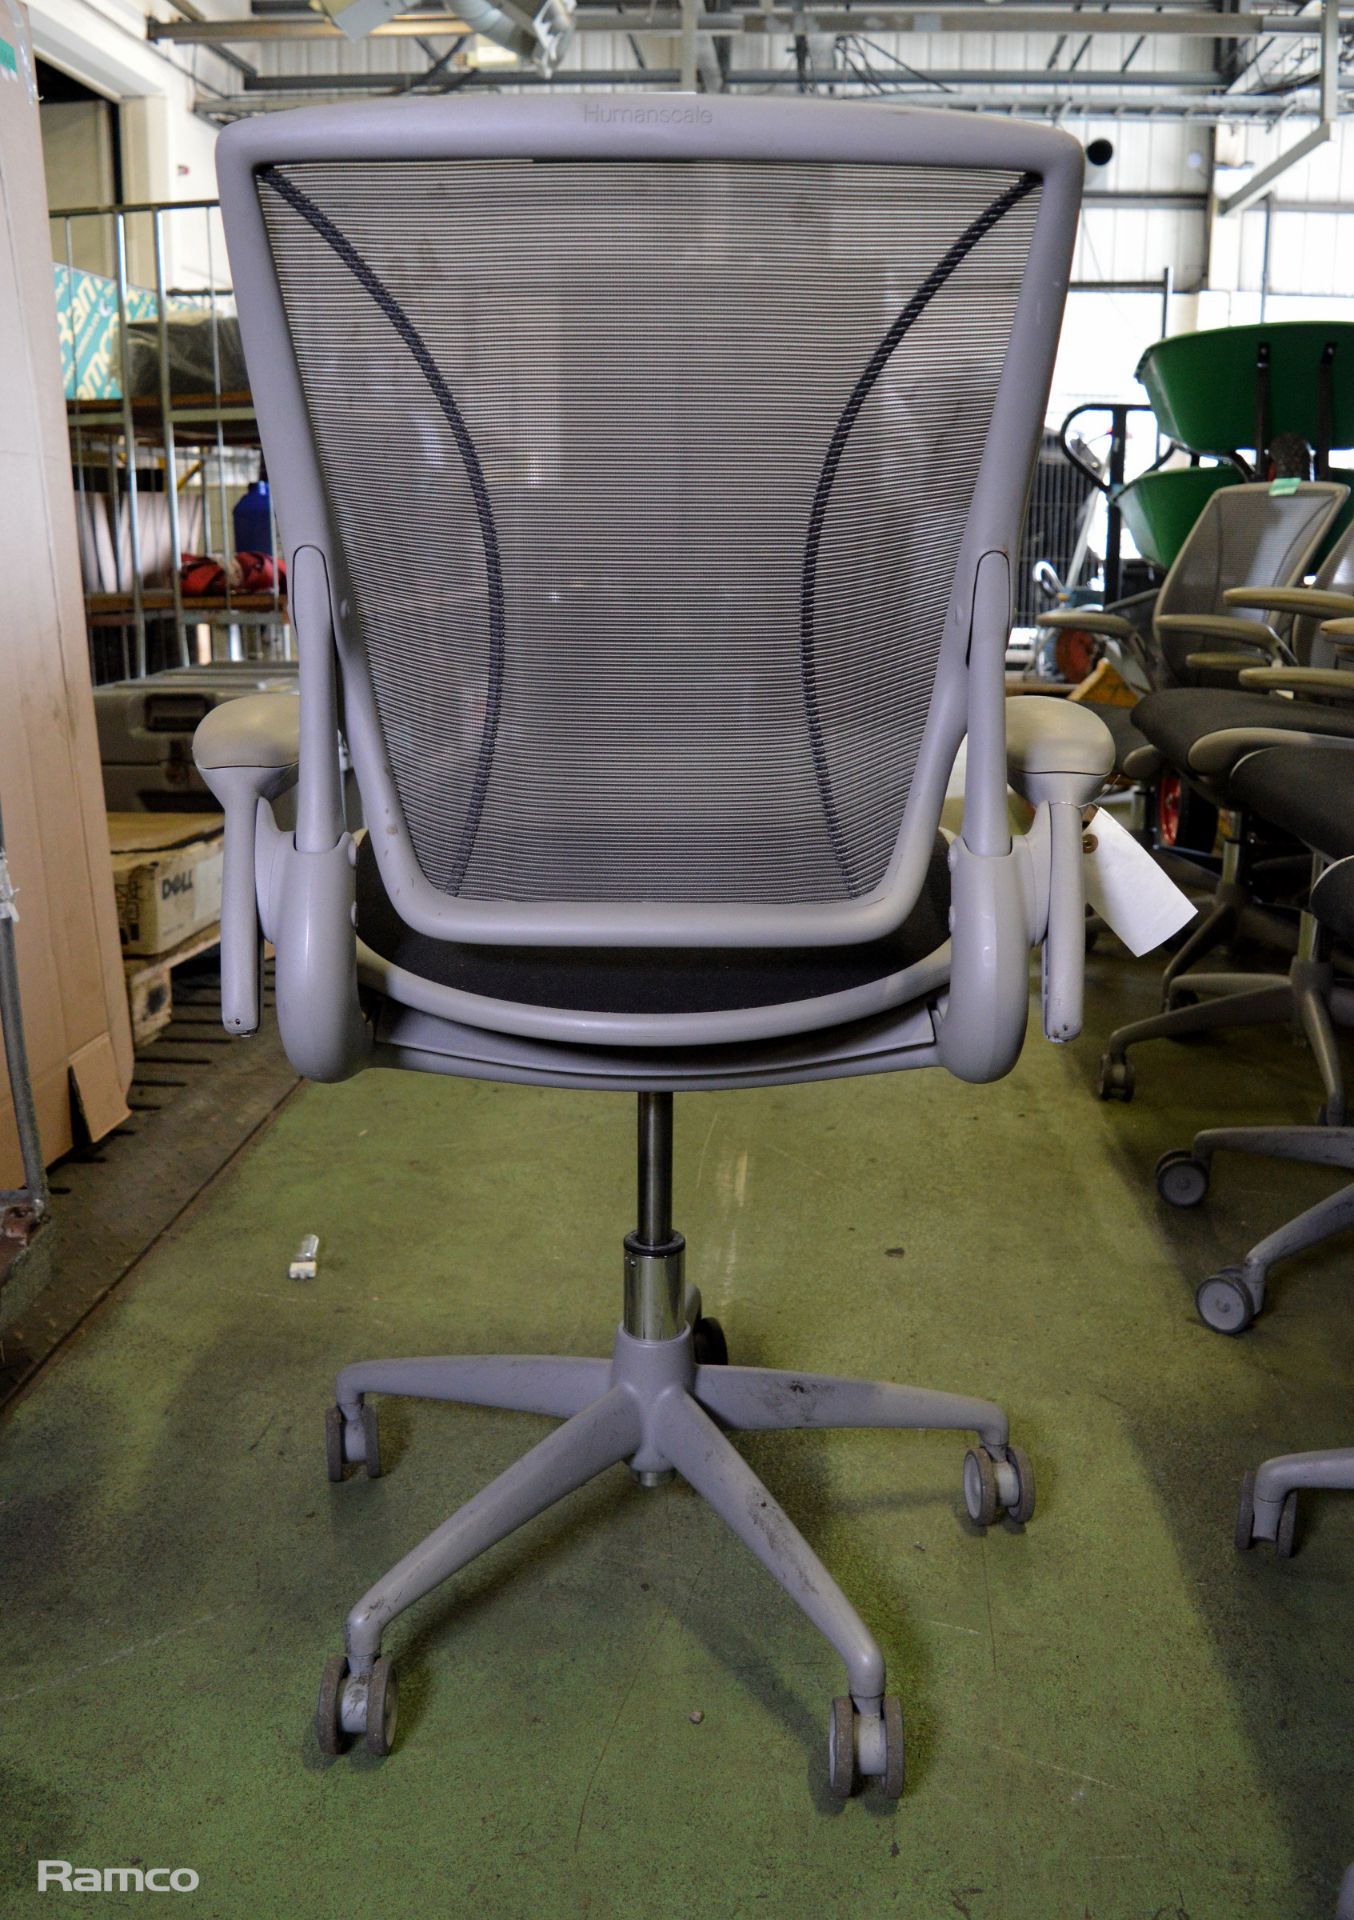 HumanScale Ergonomic Office Chair - grey - Image 3 of 3